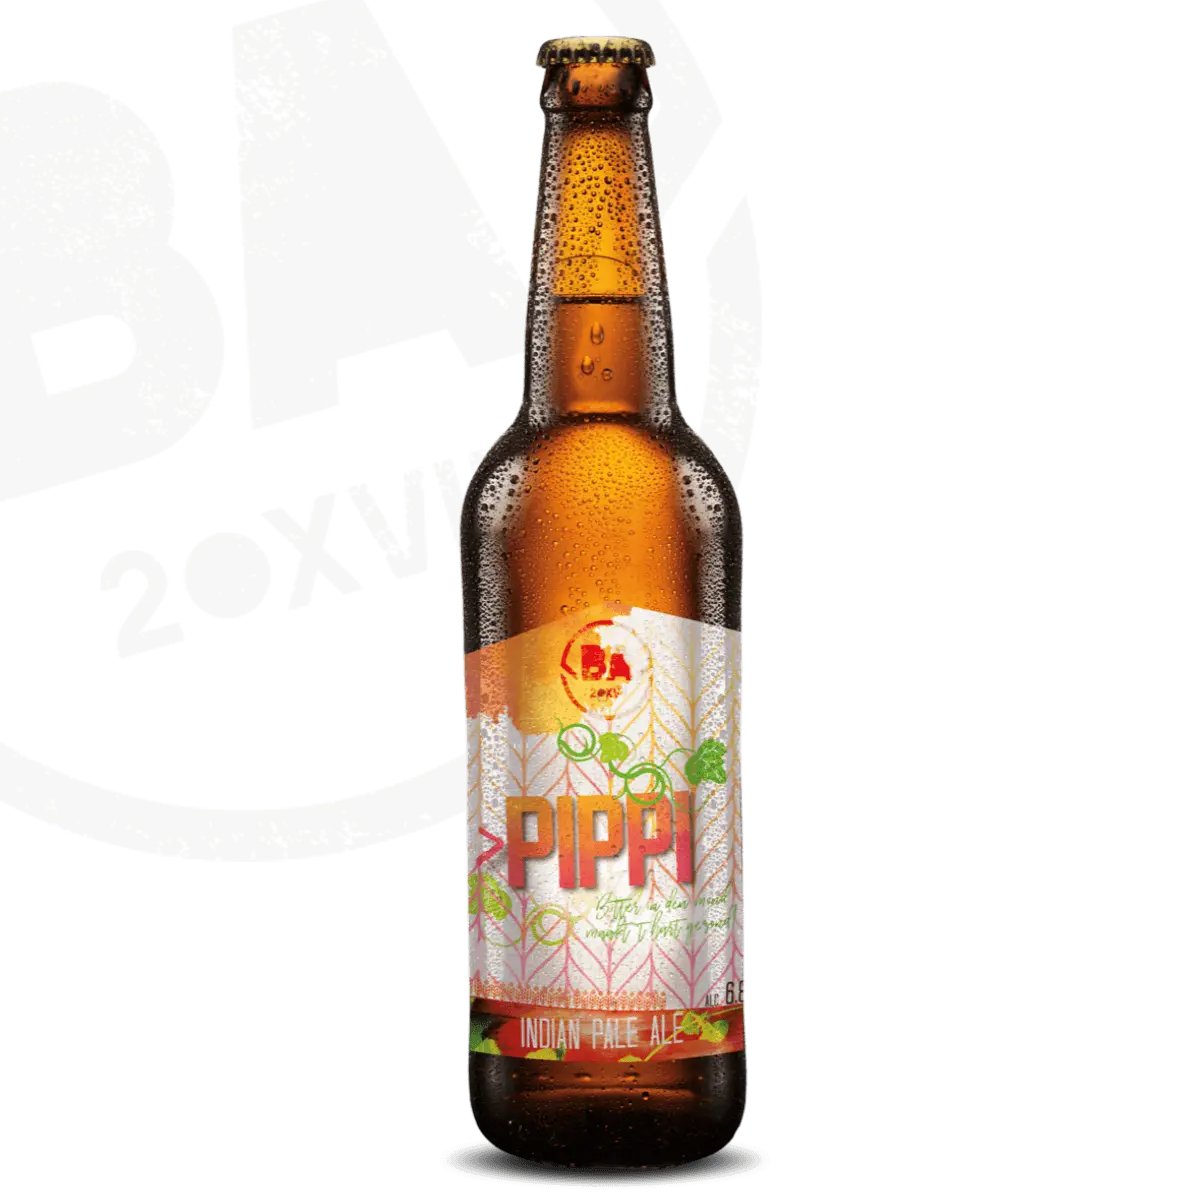 Pippi – Indian Pale Ale (IPA)